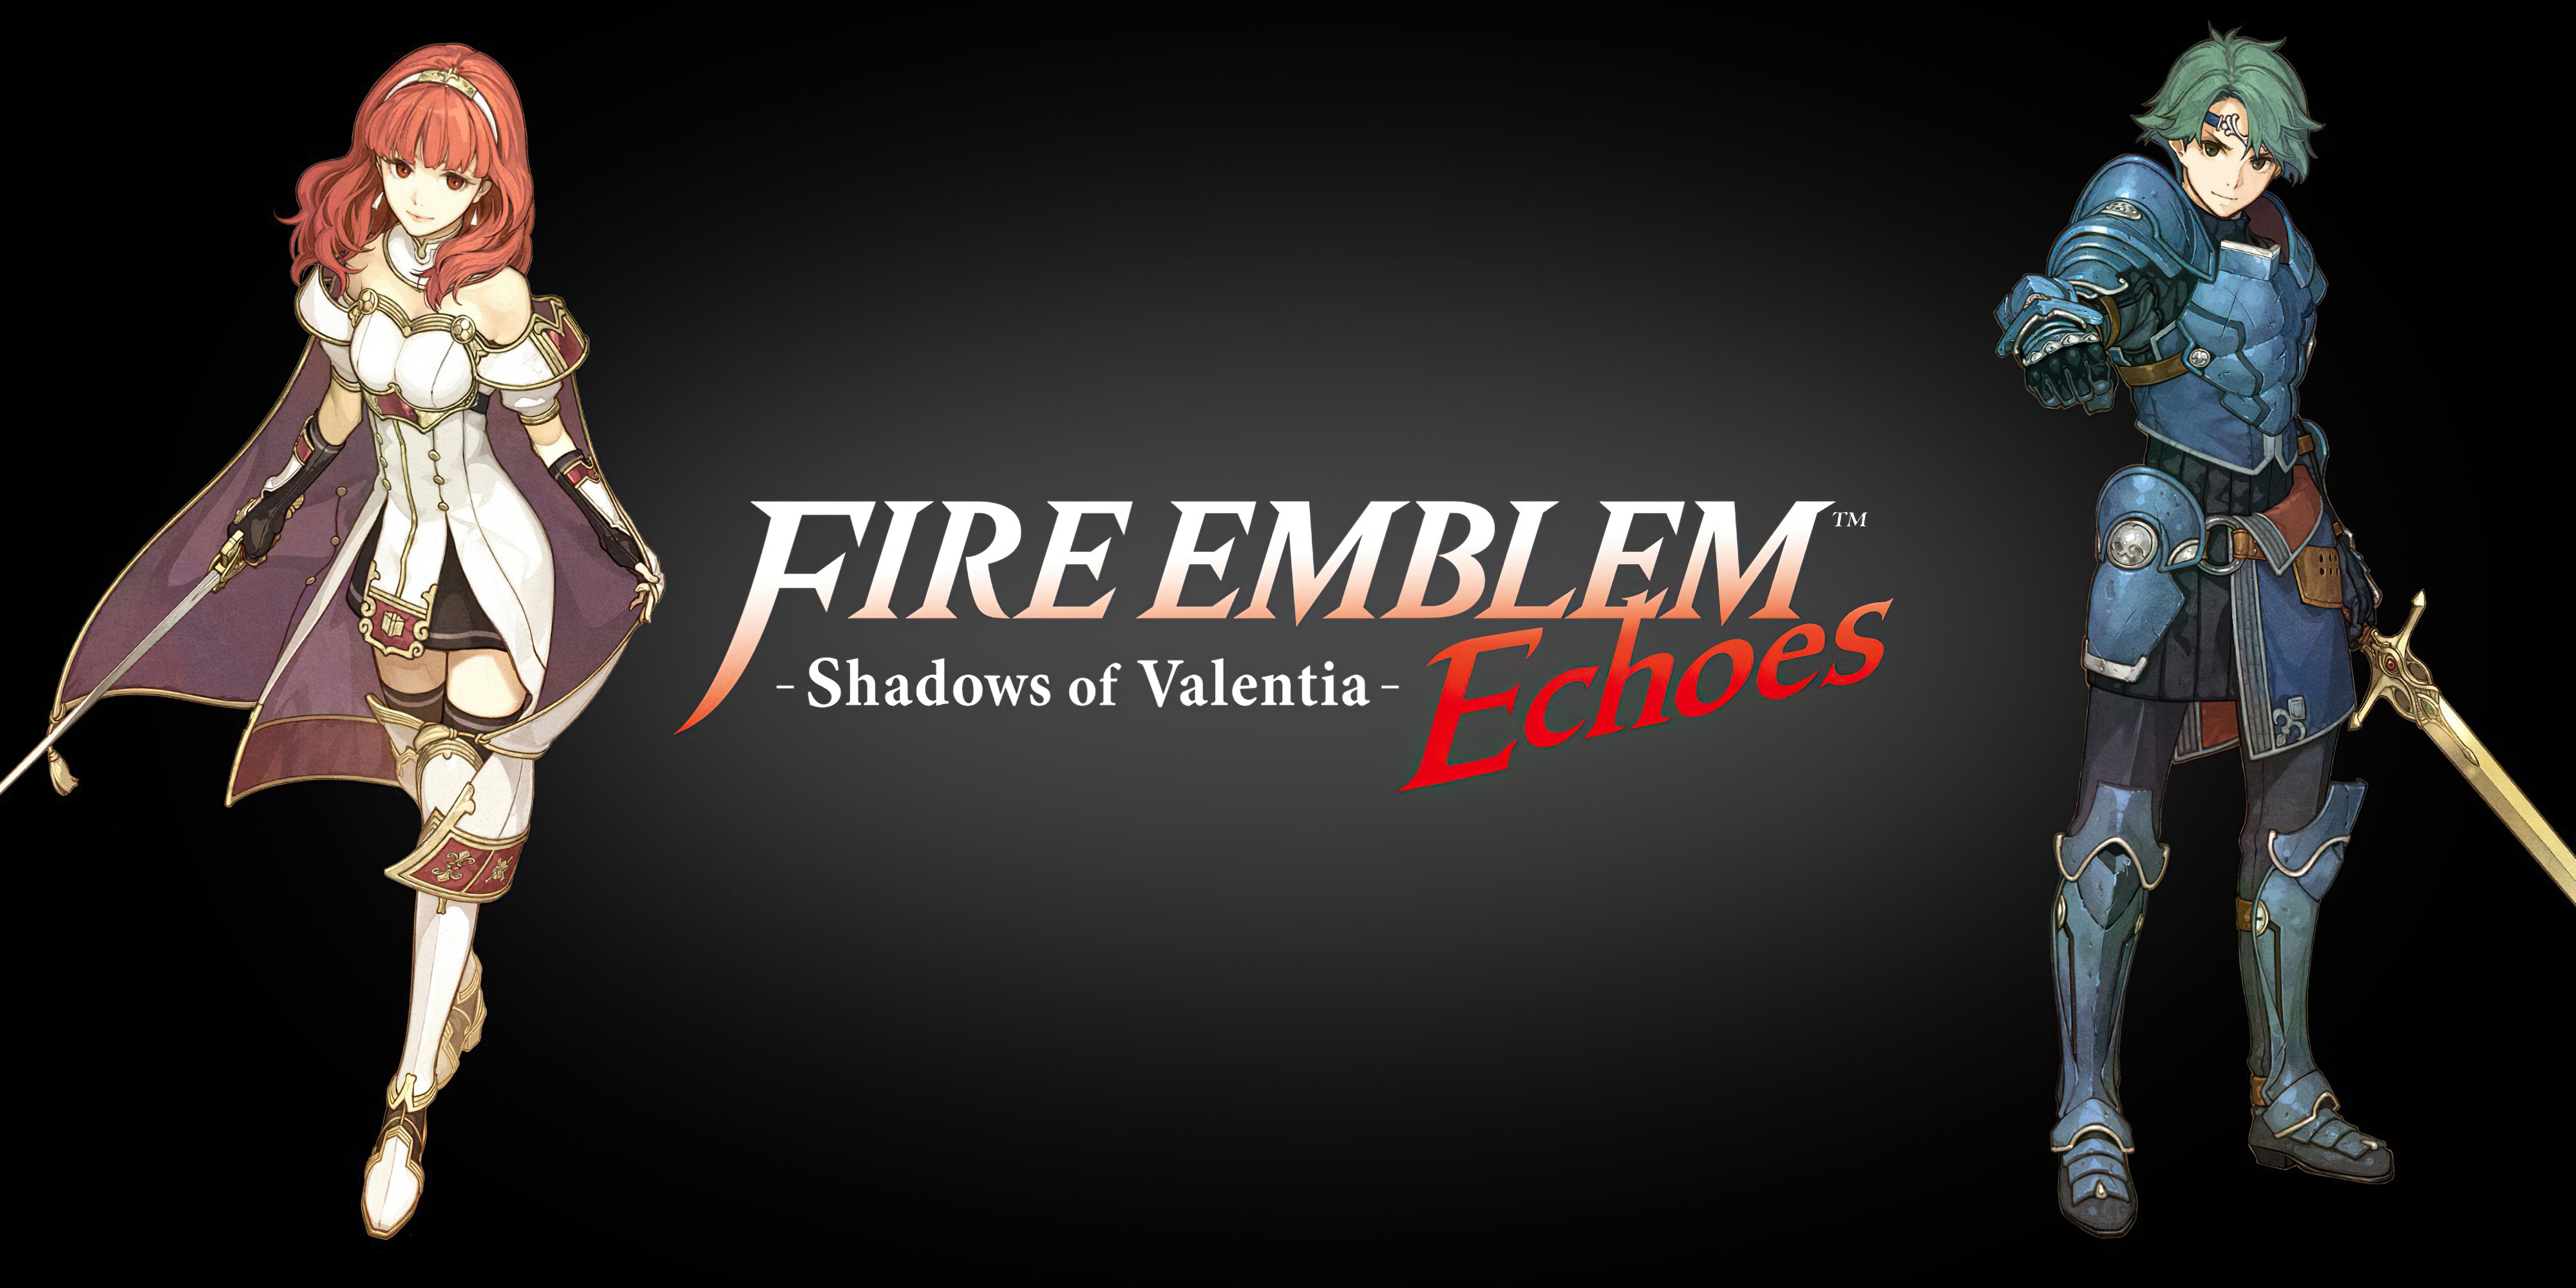 video game, fire emblem echoes: shadows of valentia, alm (fire emblem), celica (fire emblem)